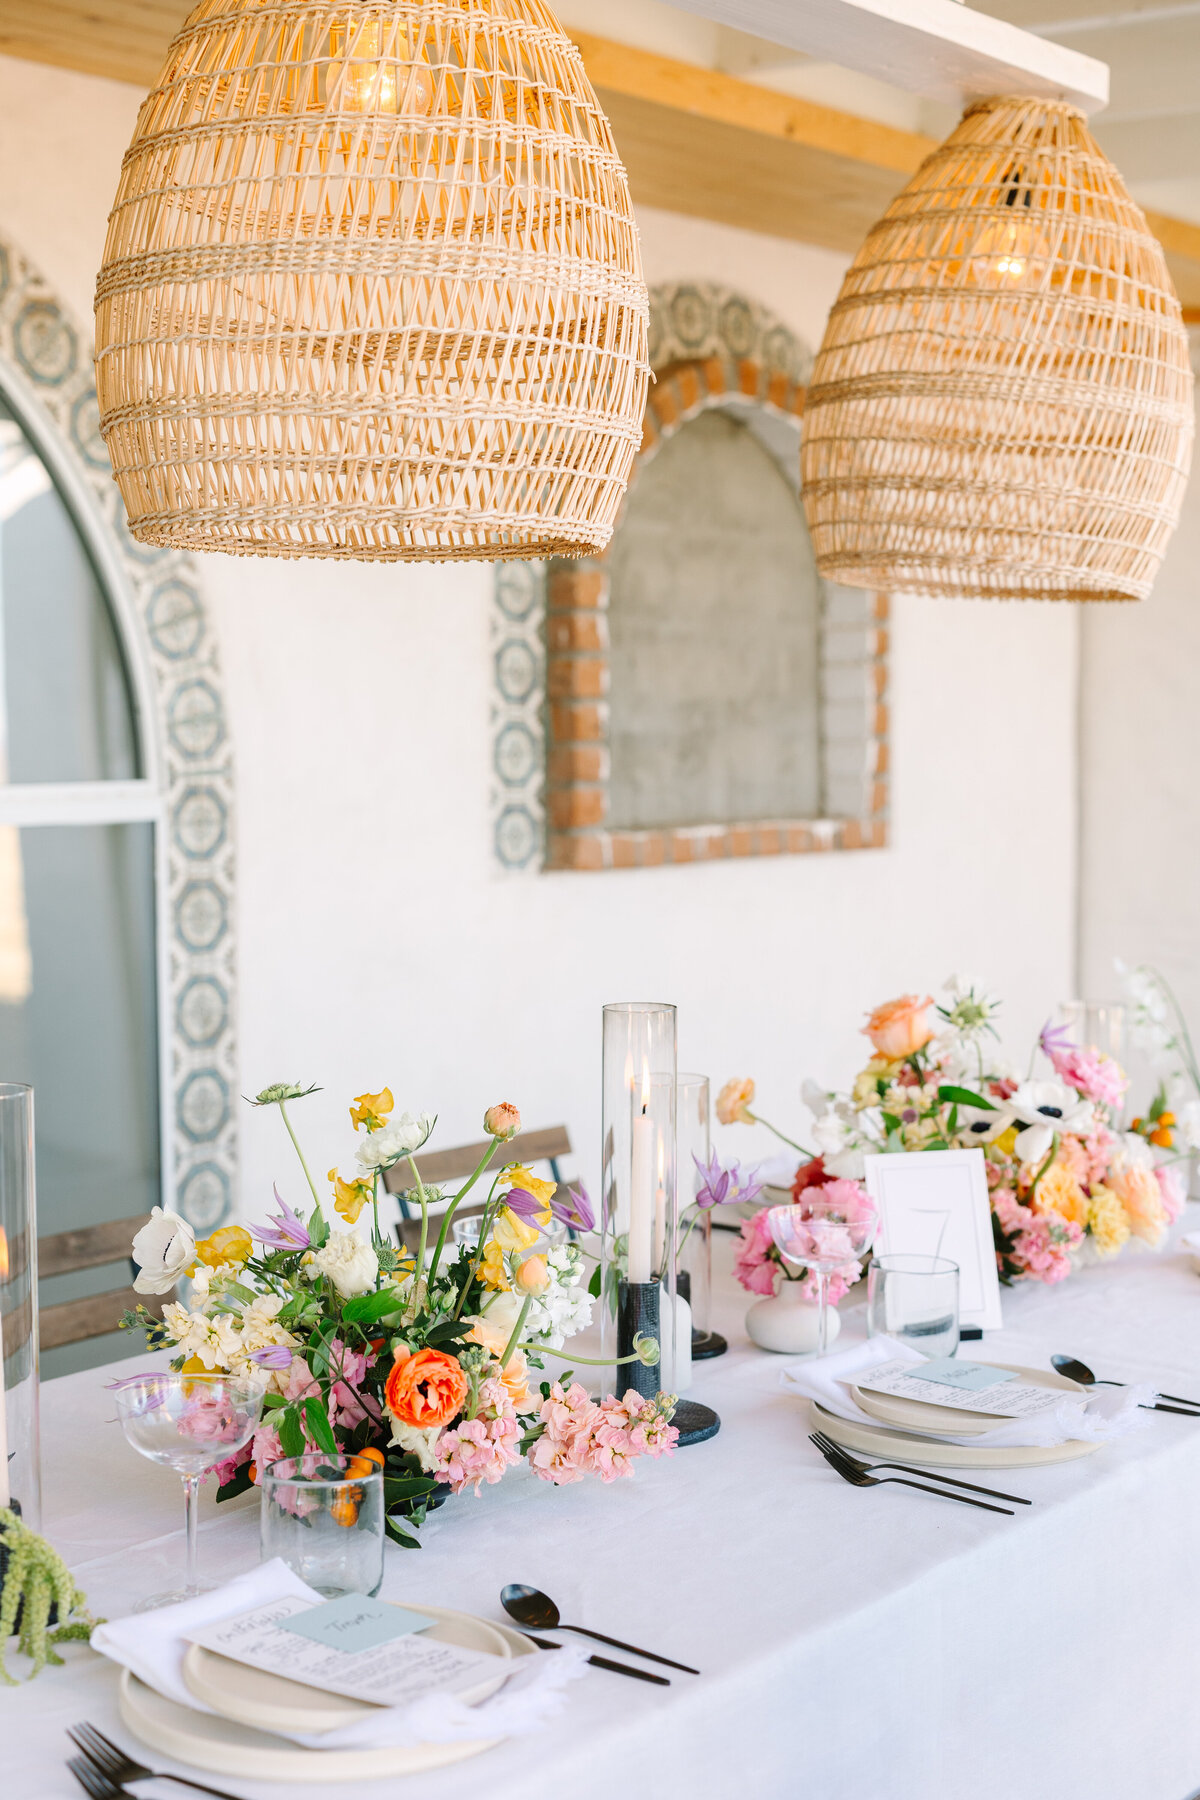 boho wedding reception tablescape with colorful bouquets and woven basket light fixtures.